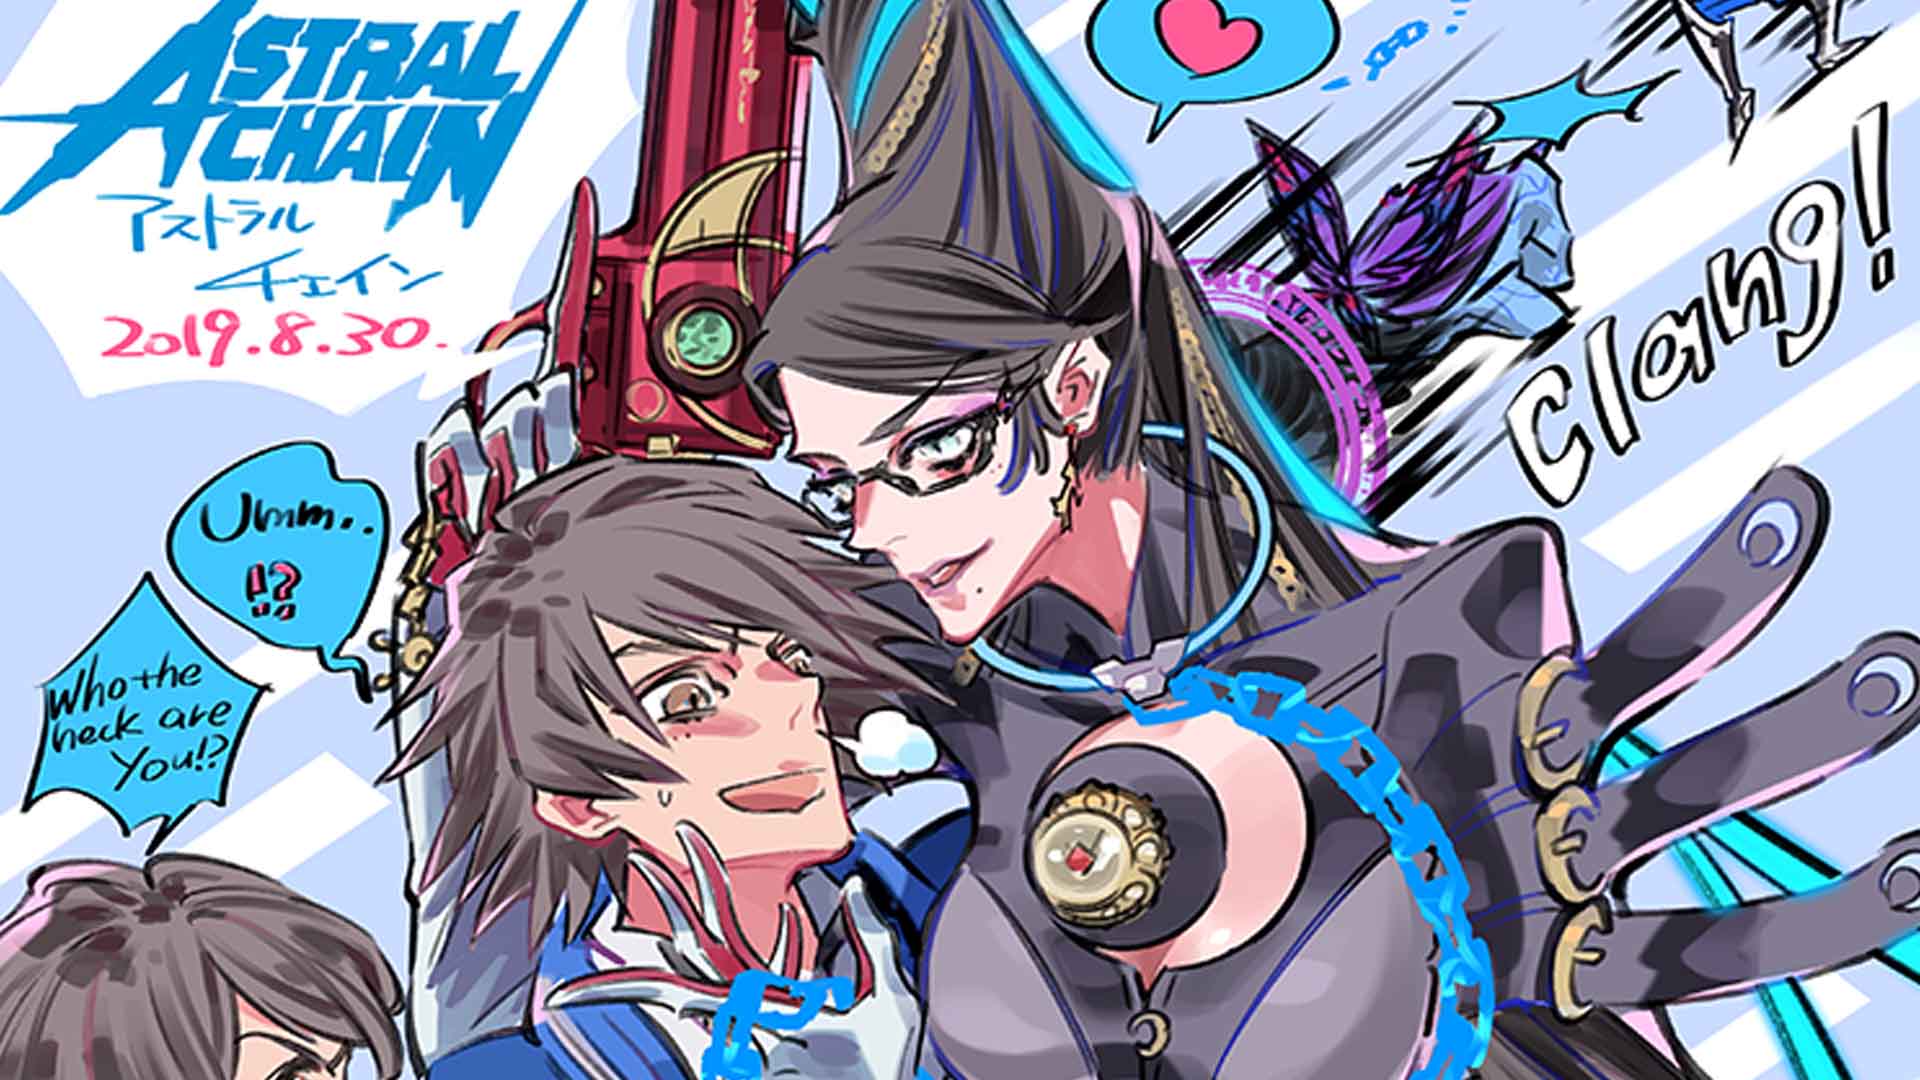 Special illustration for Astral Chain’s release brings in Bayonetta.